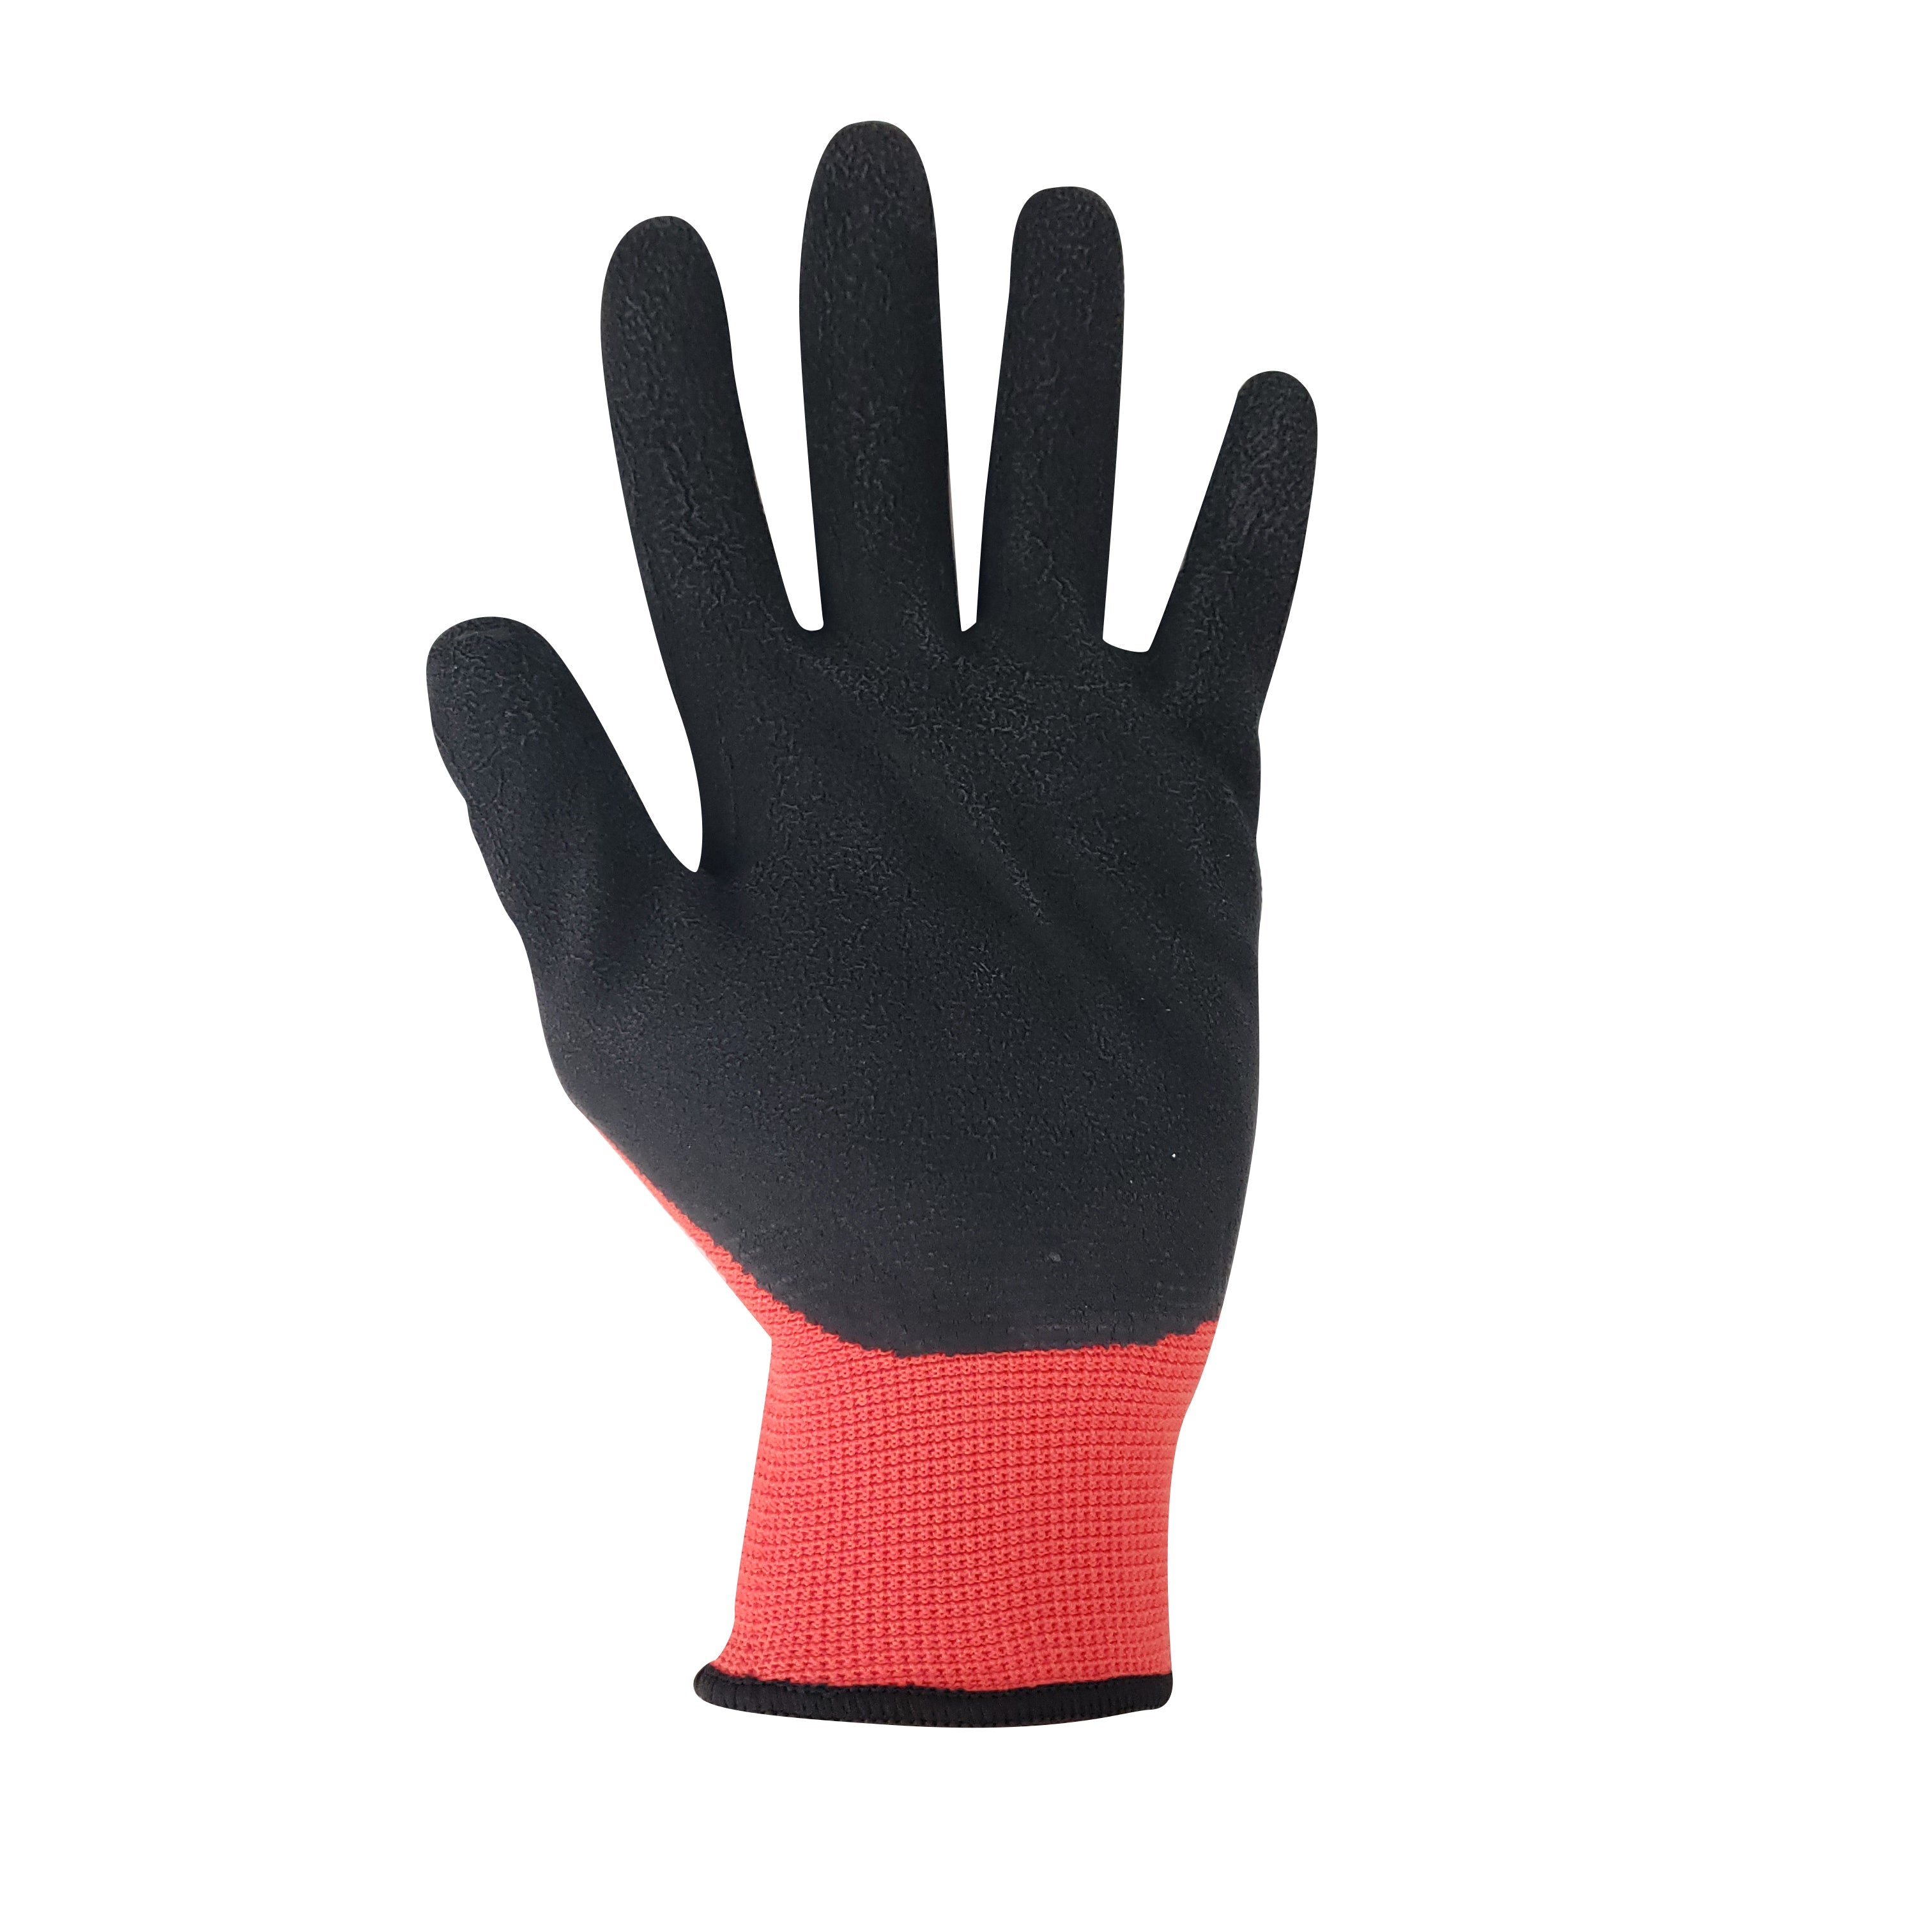 Work Gloves - Large Size [12 pairs/pack]